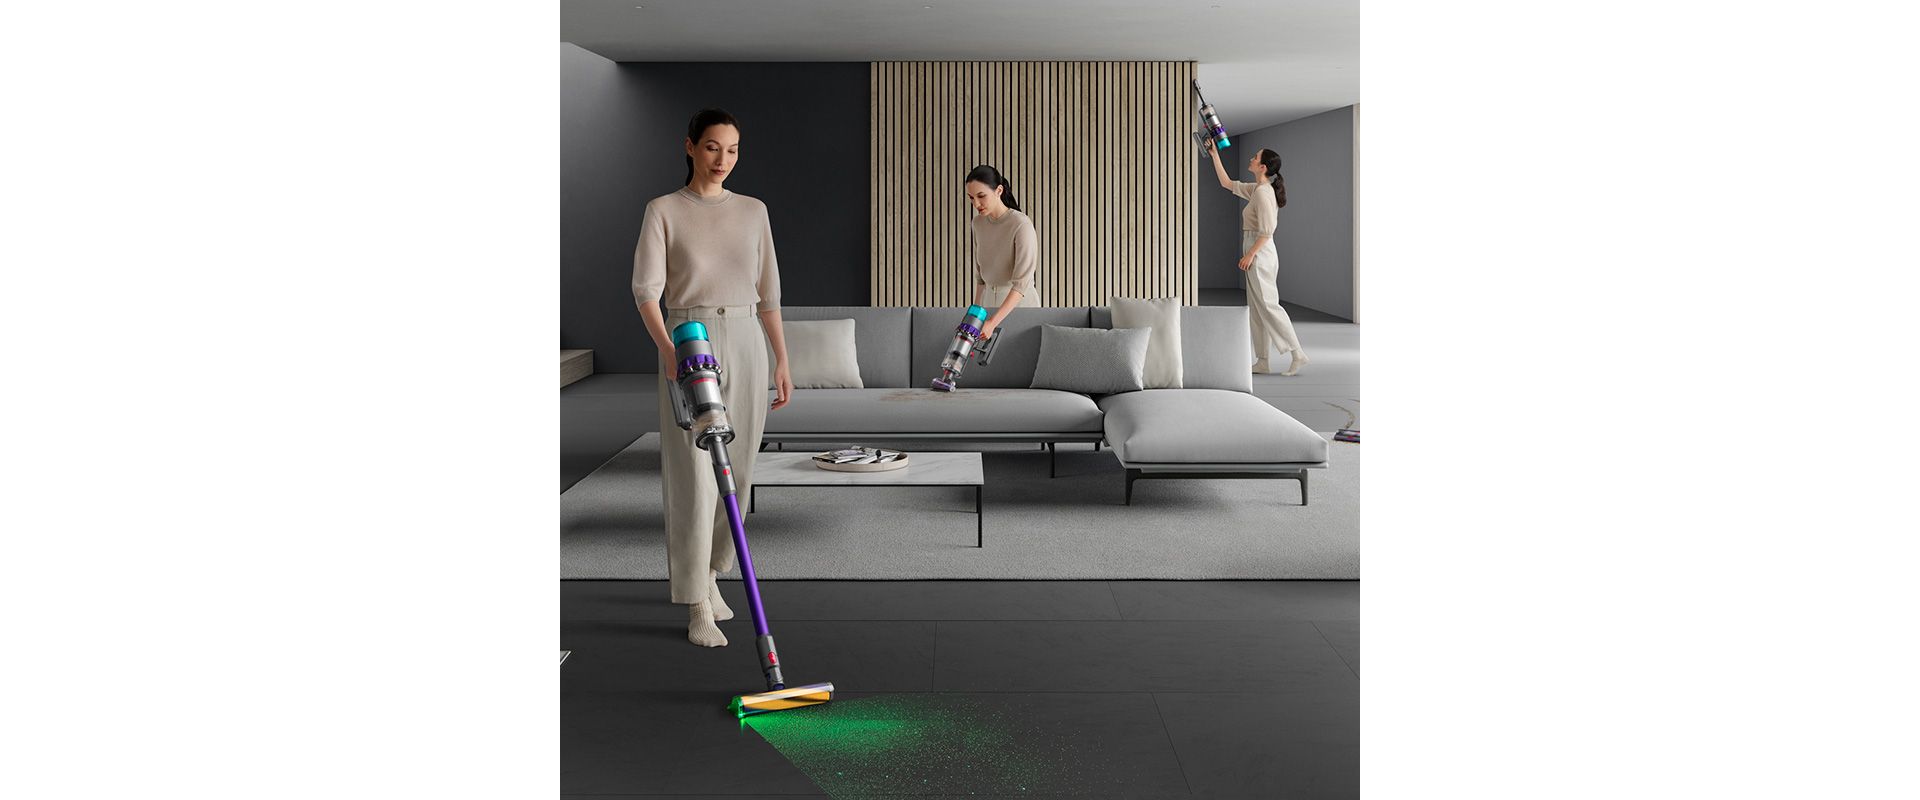 Woman shown using the Dyson Gen5detect as a stick and handheld vacuum around the home.